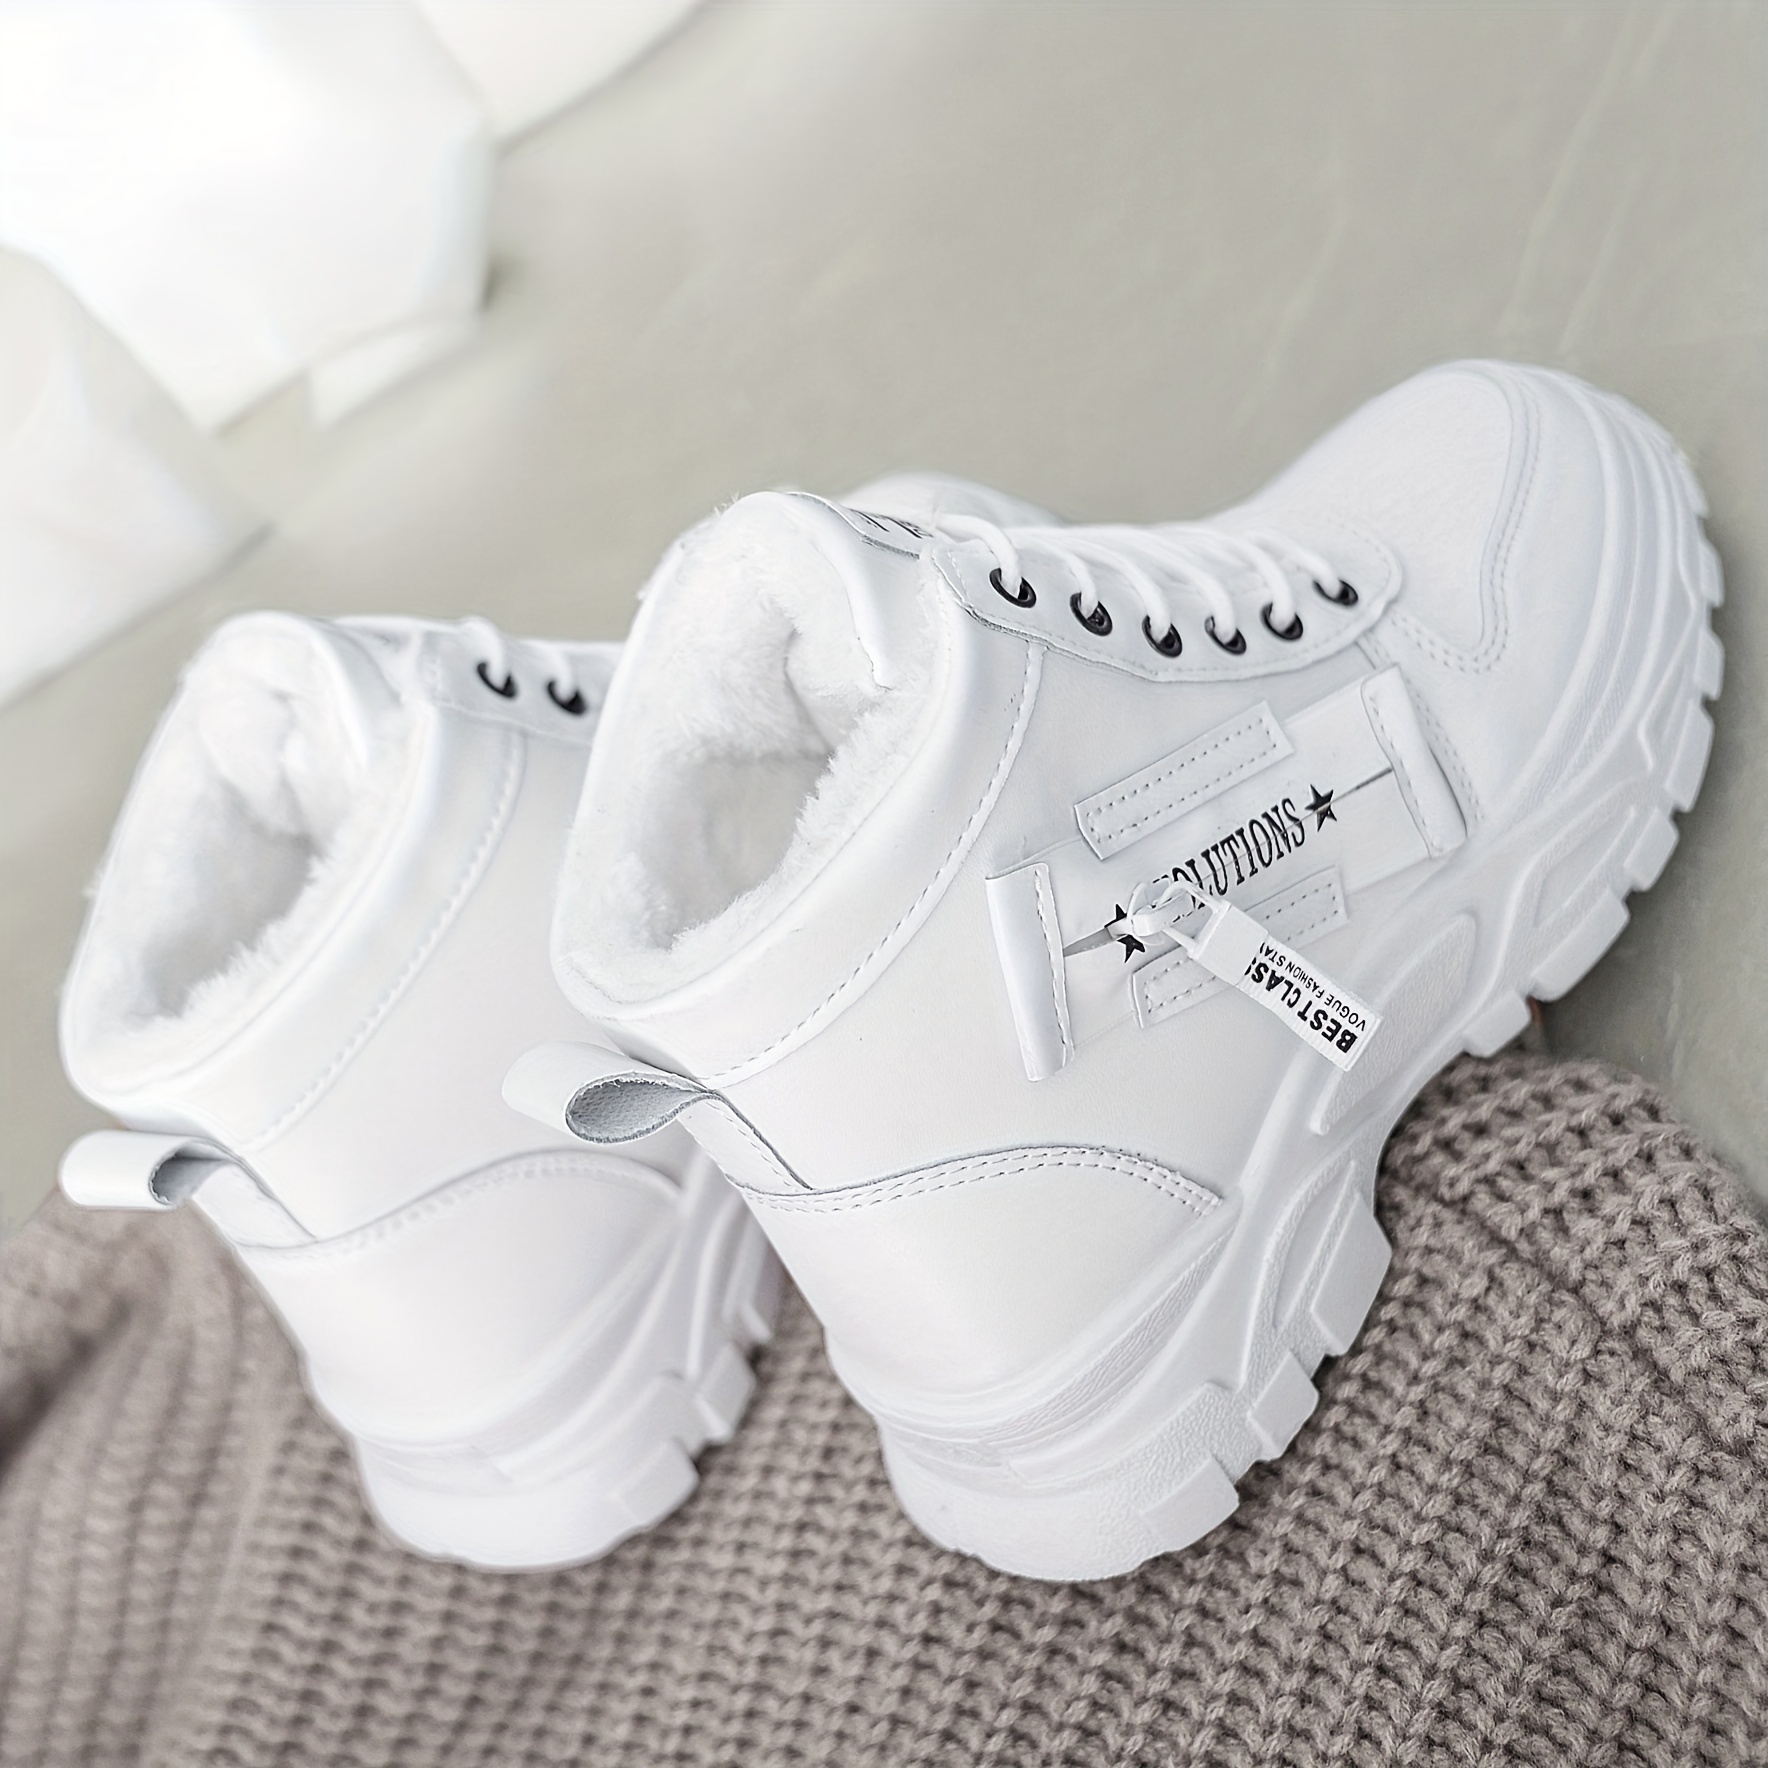 womens winter high top sneakers casual lace up plush lined boots comfortable side zipper short boots details 8